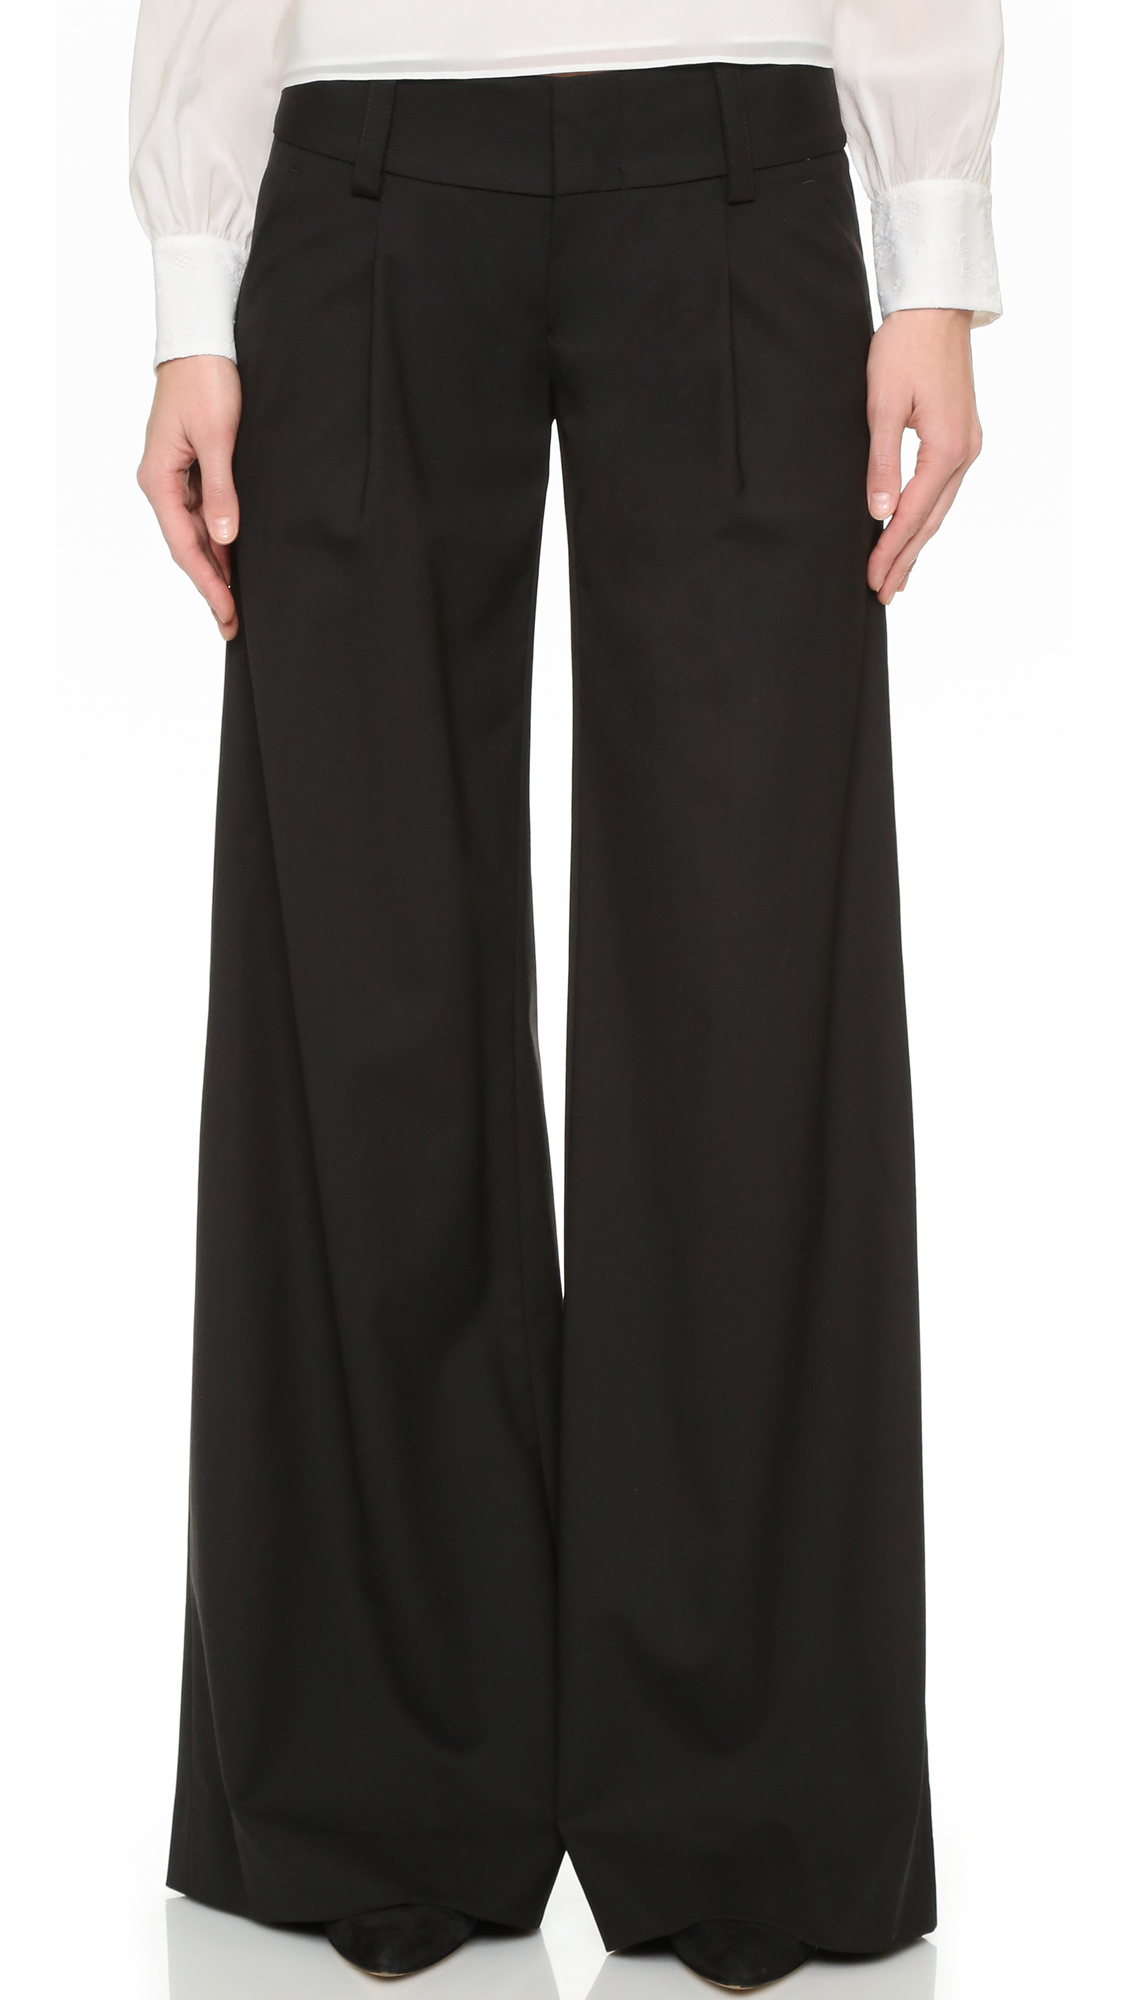 Lyst - Alice + Olivia Eric Front Pleat Wide Leg Pants in Black